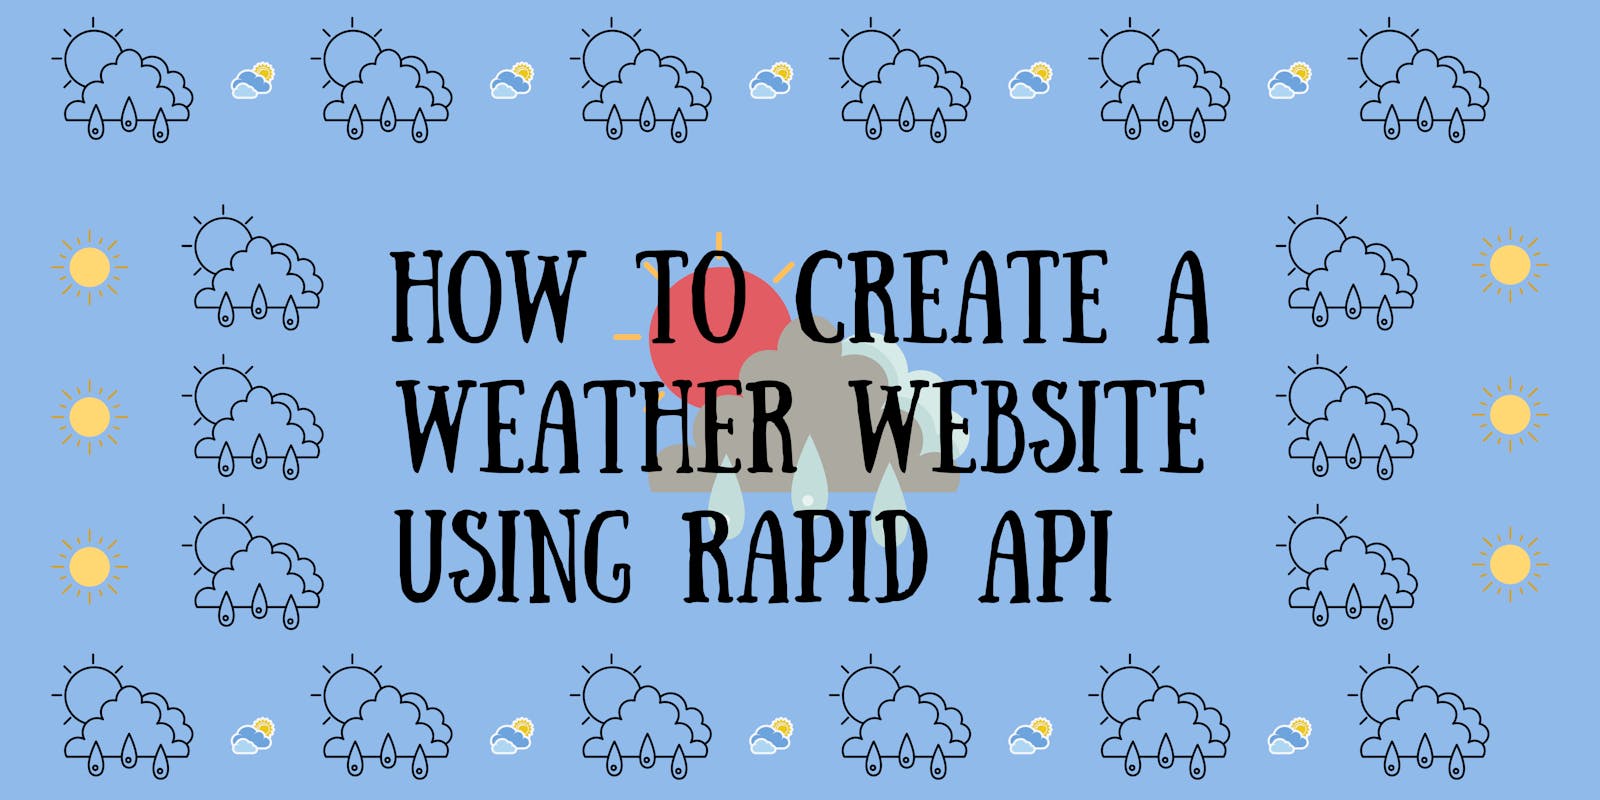 How to make a Weather Website :-